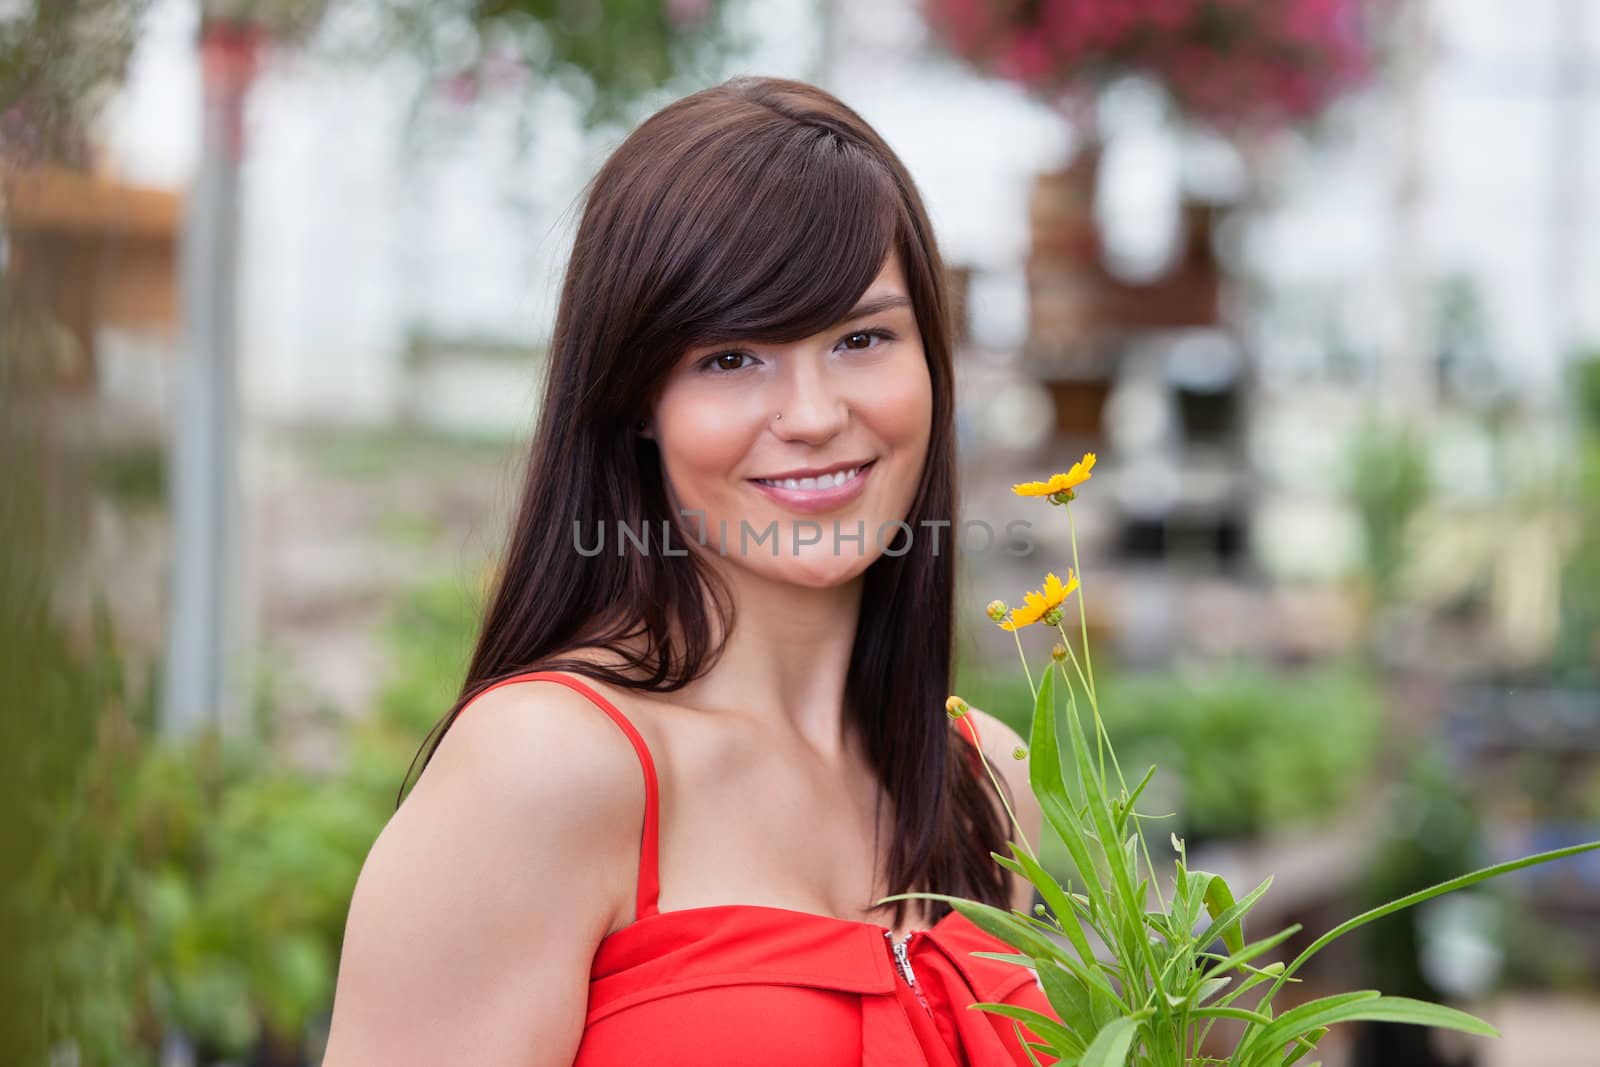 Smiling woman holding flower pot by leaf